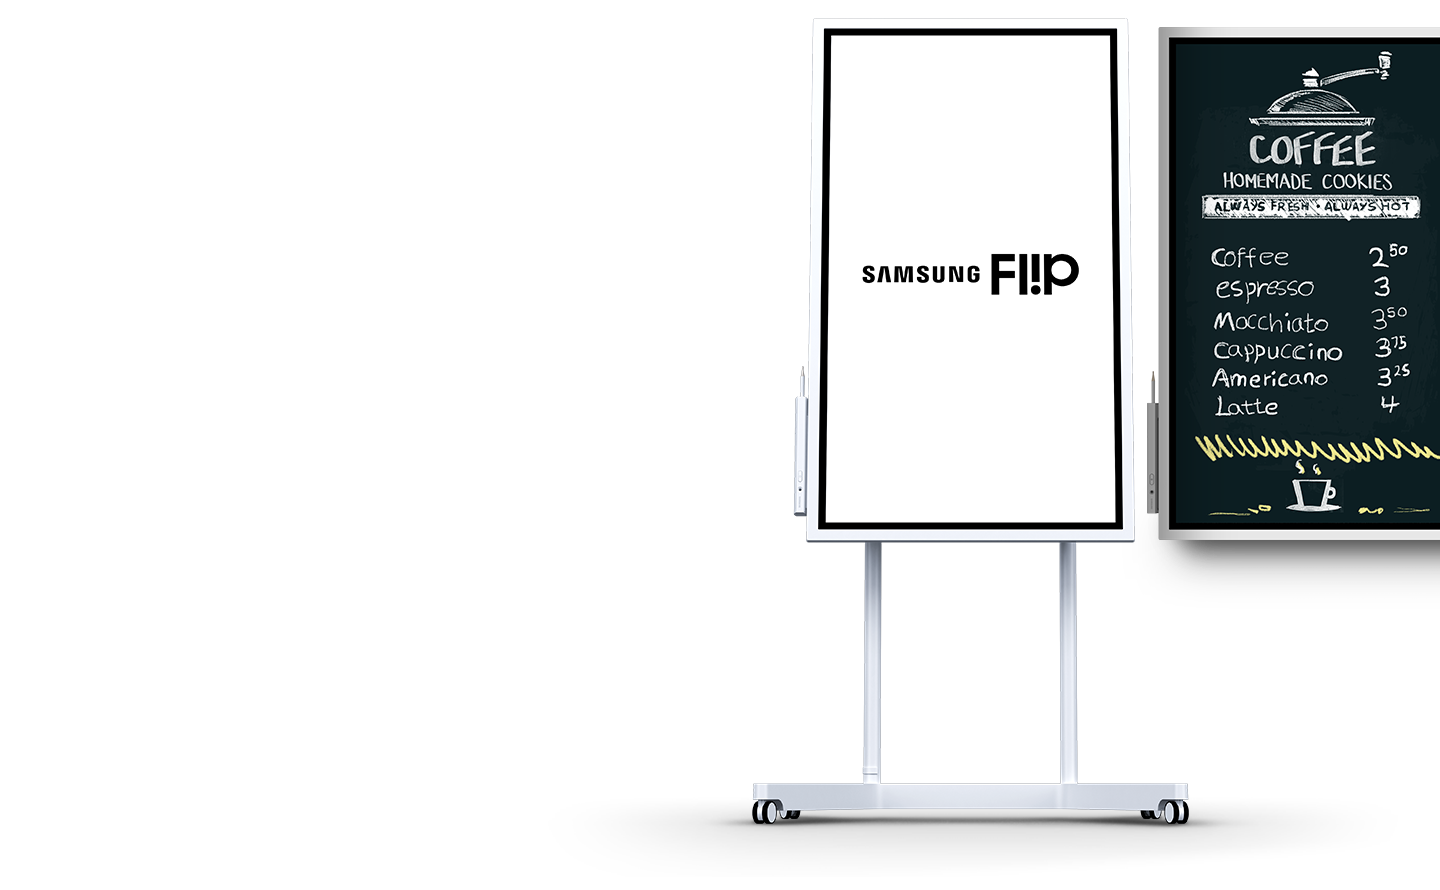 To the left, a stand-up Flip displays the Samsung Flip logo, while a wall-mounted Flip display unit on the right shows a coffee shop menu.